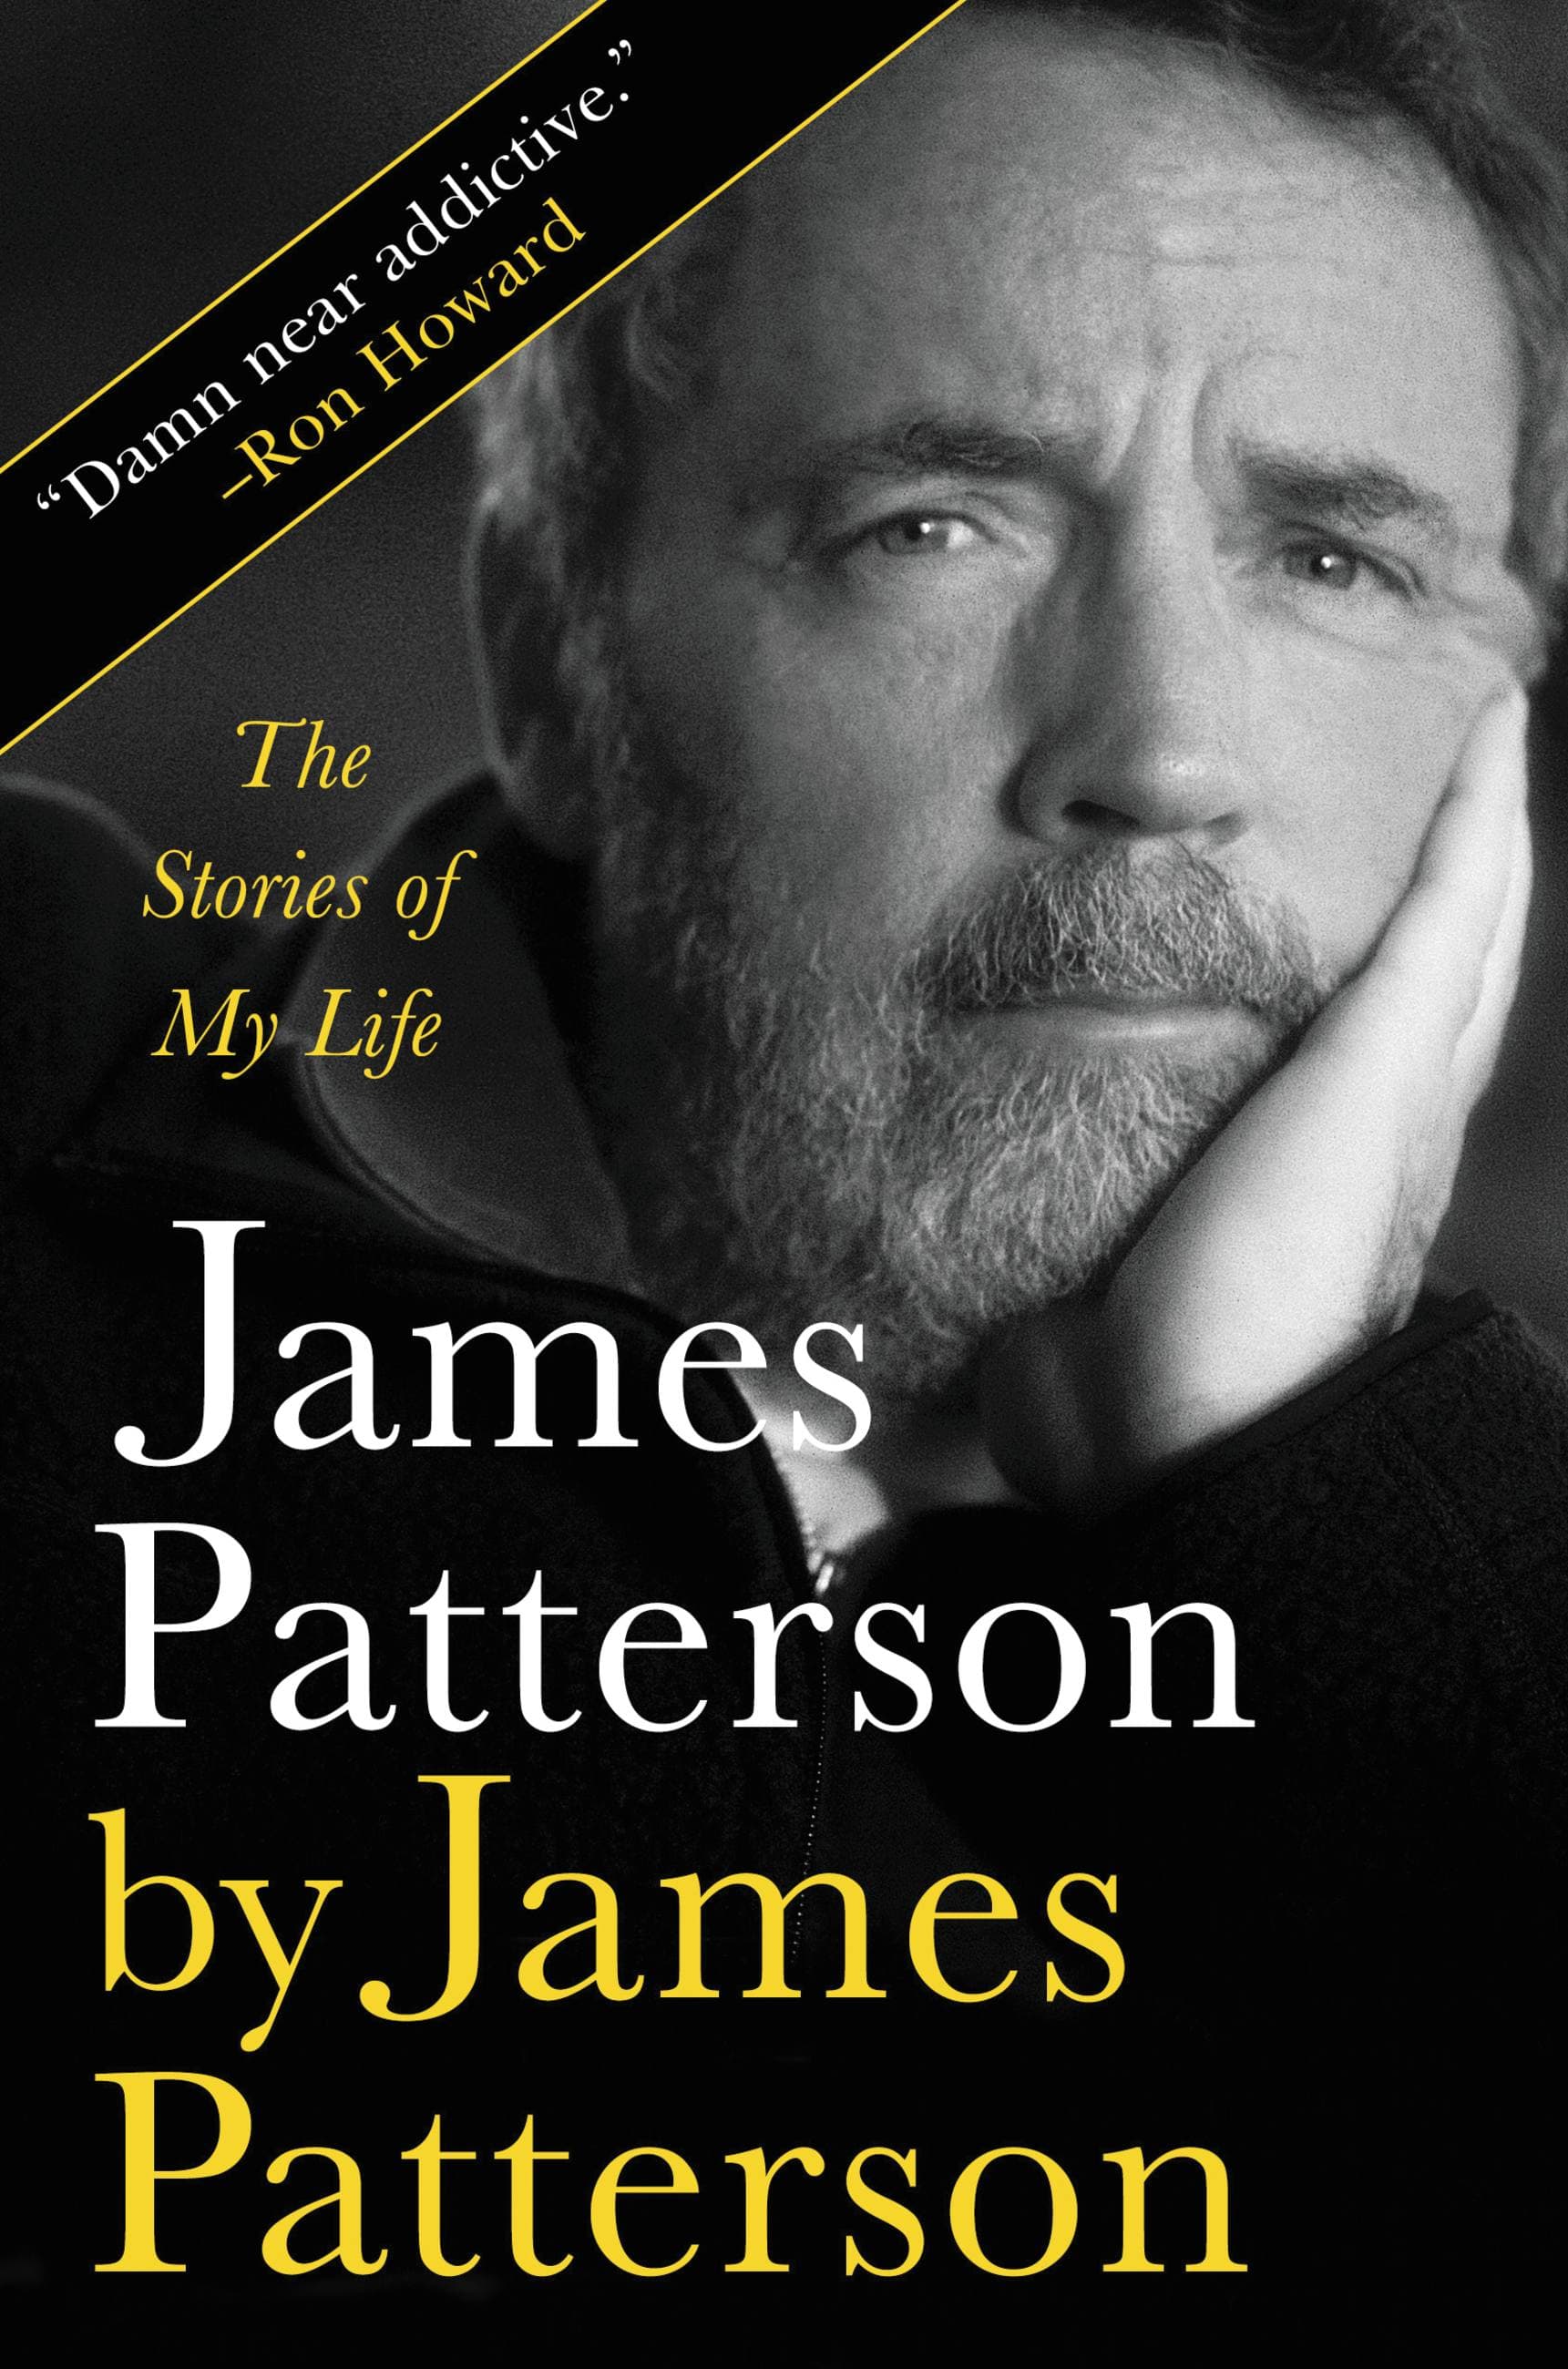 Author James Patterson tells his own story in new memoir Here & Now